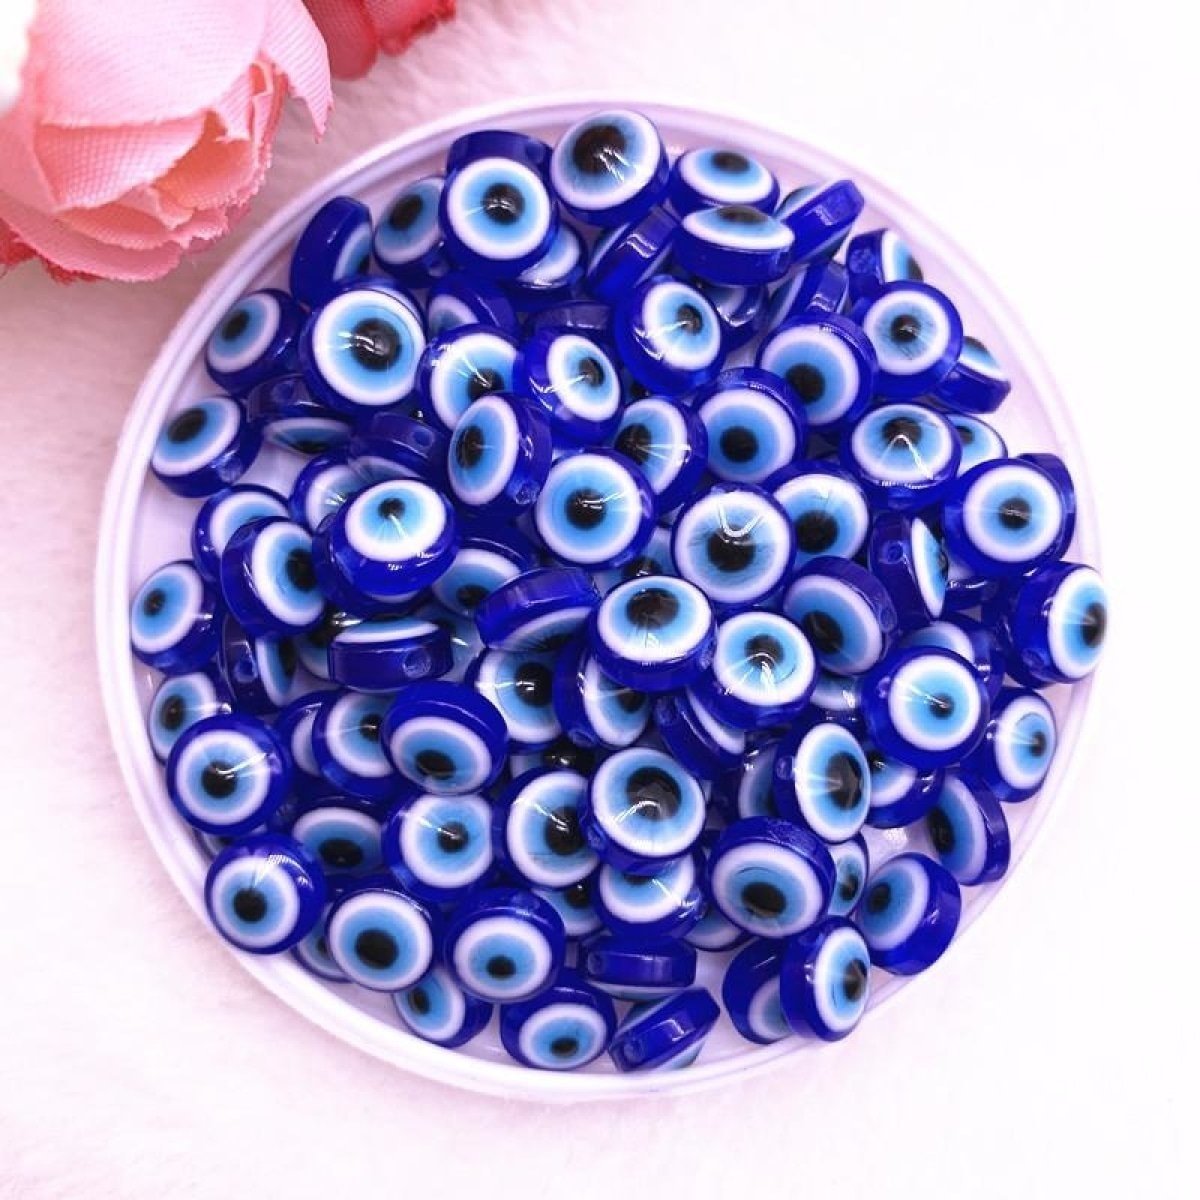 48pcs 8/10mm Oval Resin Spacer Beads Double Sided Eyes for Jewellery Making DIY Bracelet Beads Set B - Deep Blue 8mm - Asia Sell